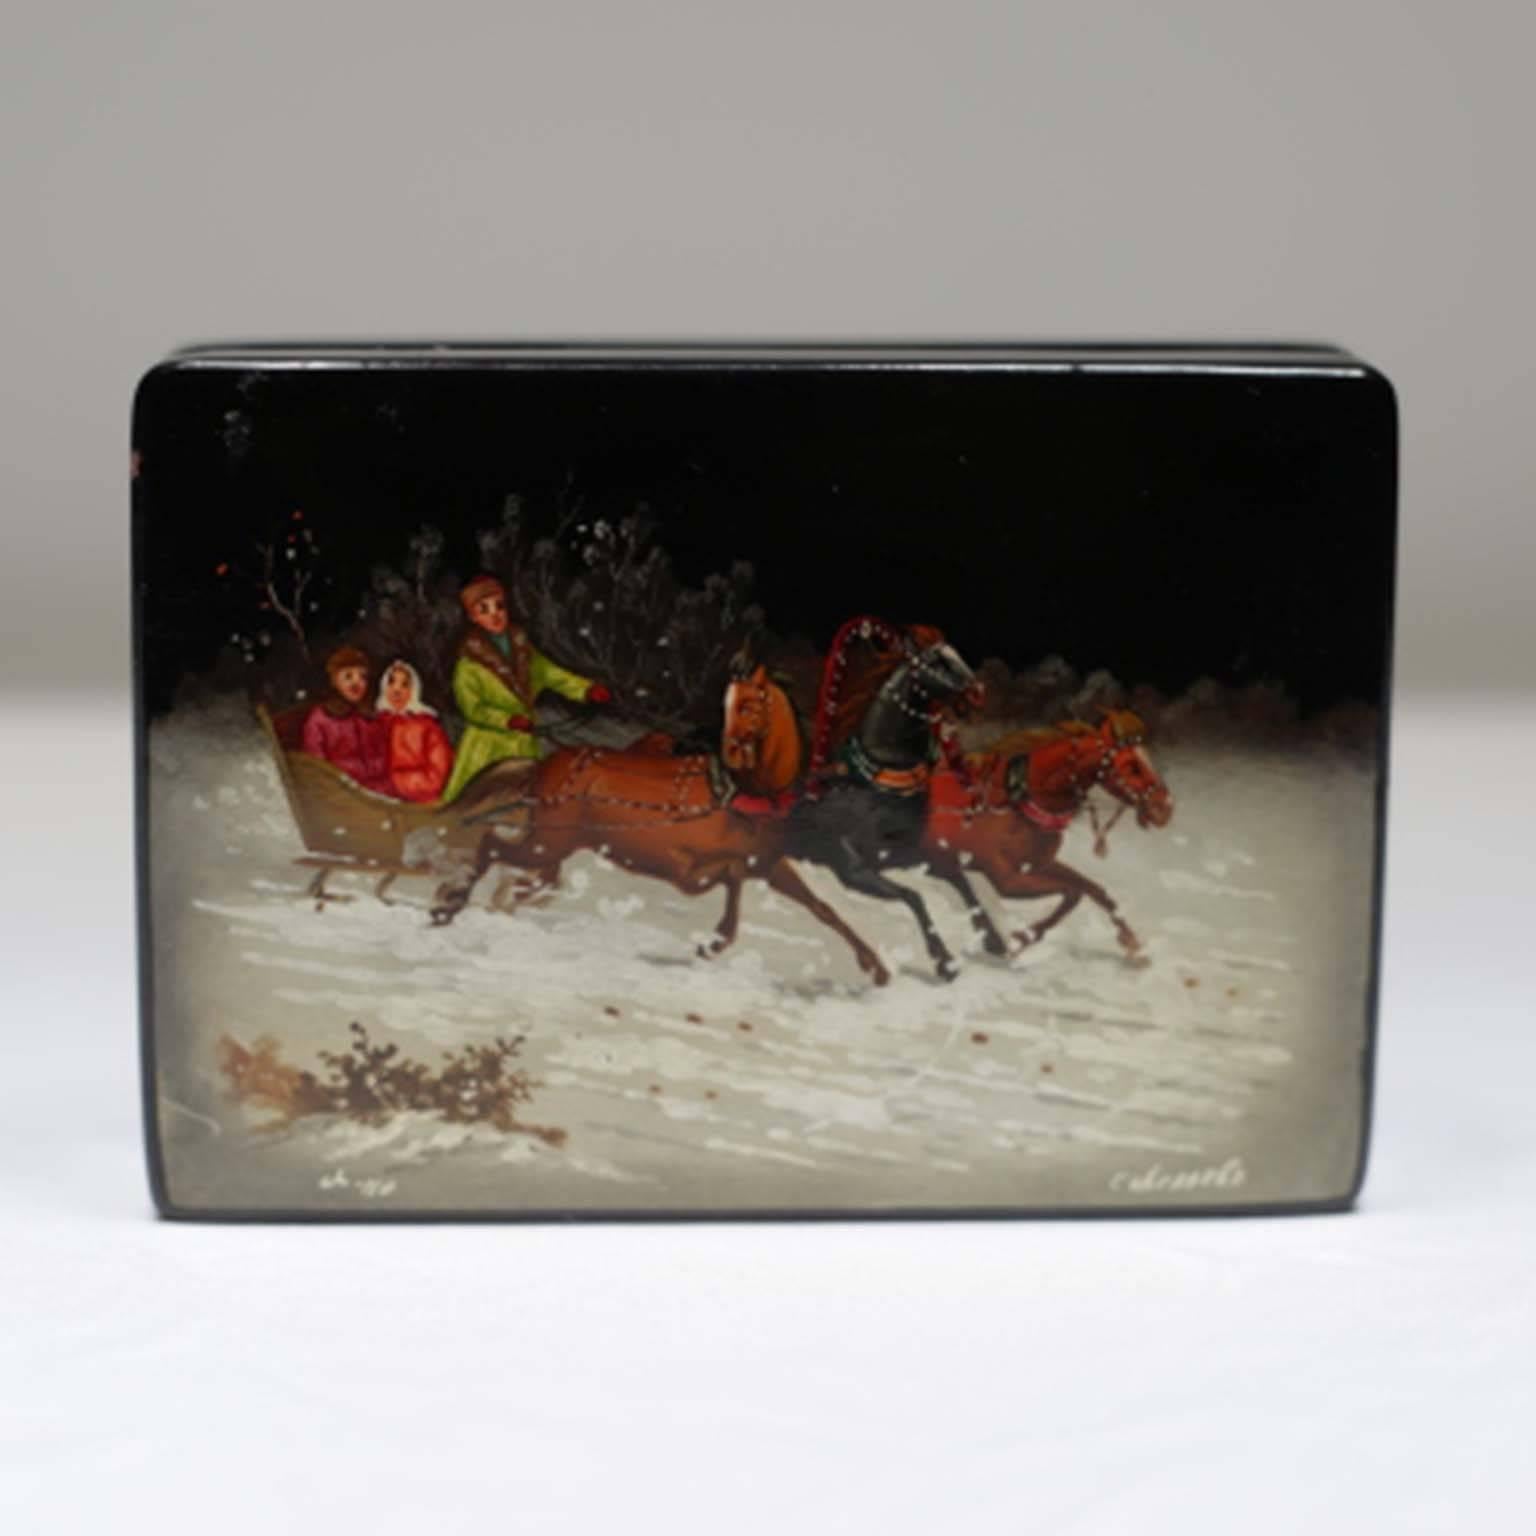 Lacquered box from the former Soviet Union with vibrant red interior. Signed by artist.